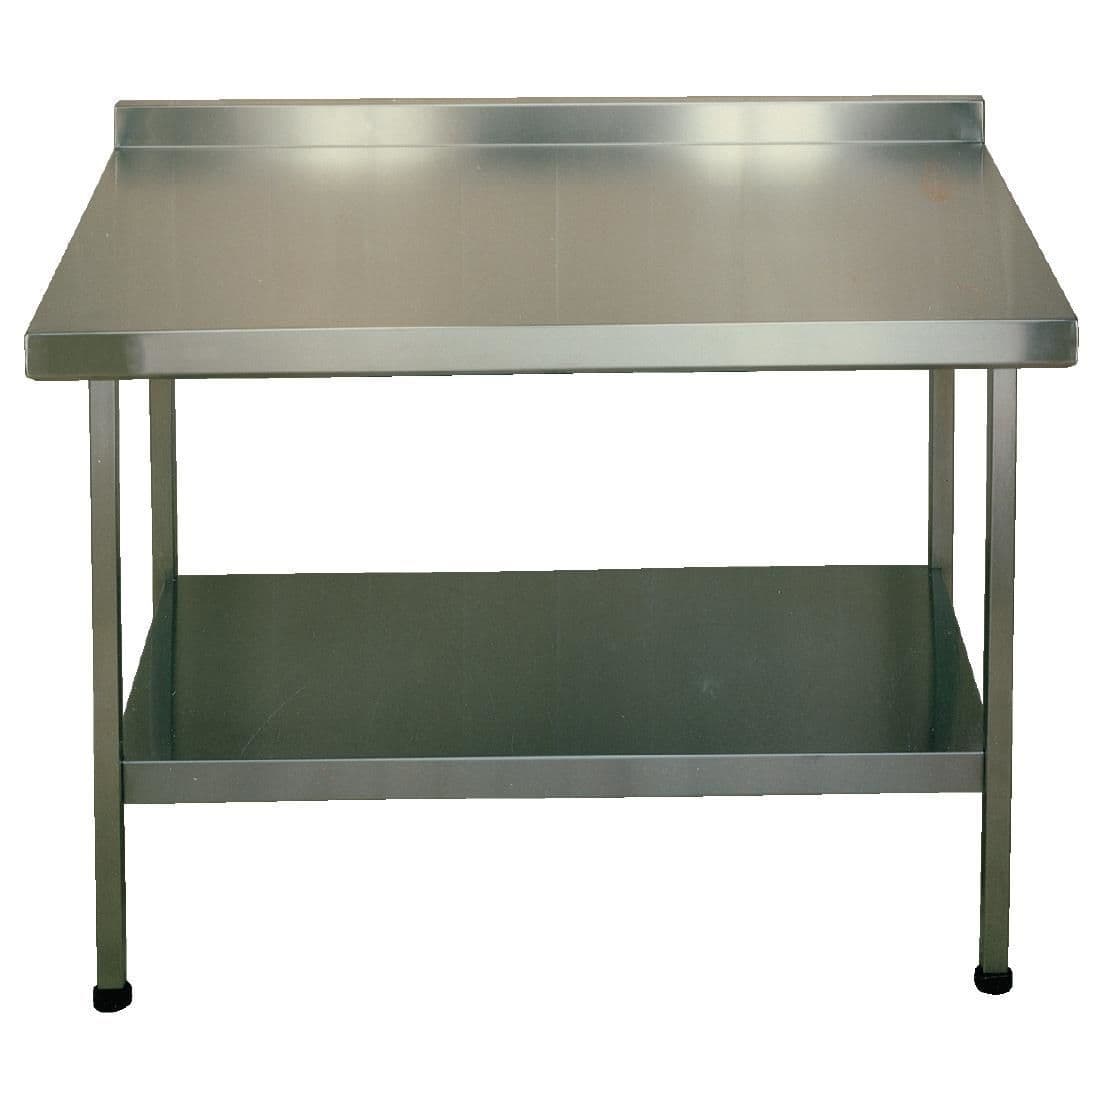 Franke Sissons Stainless Steel Wall Table with Upstand 1200x600mm JD Catering Equipment Solutions Ltd